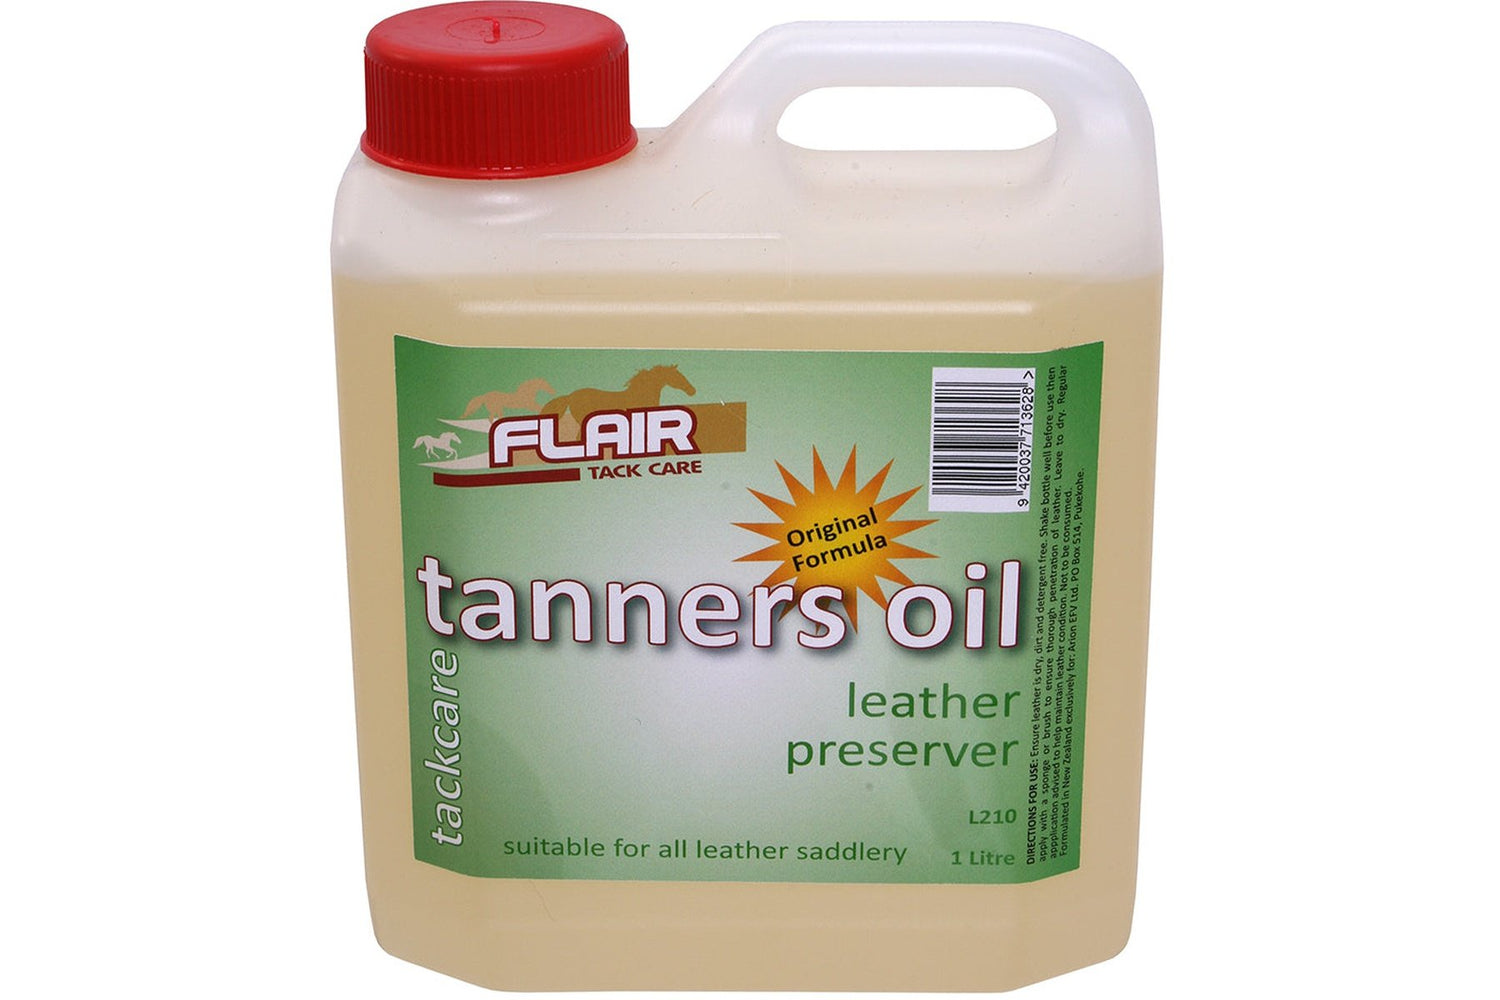 Flair Tanners Oil